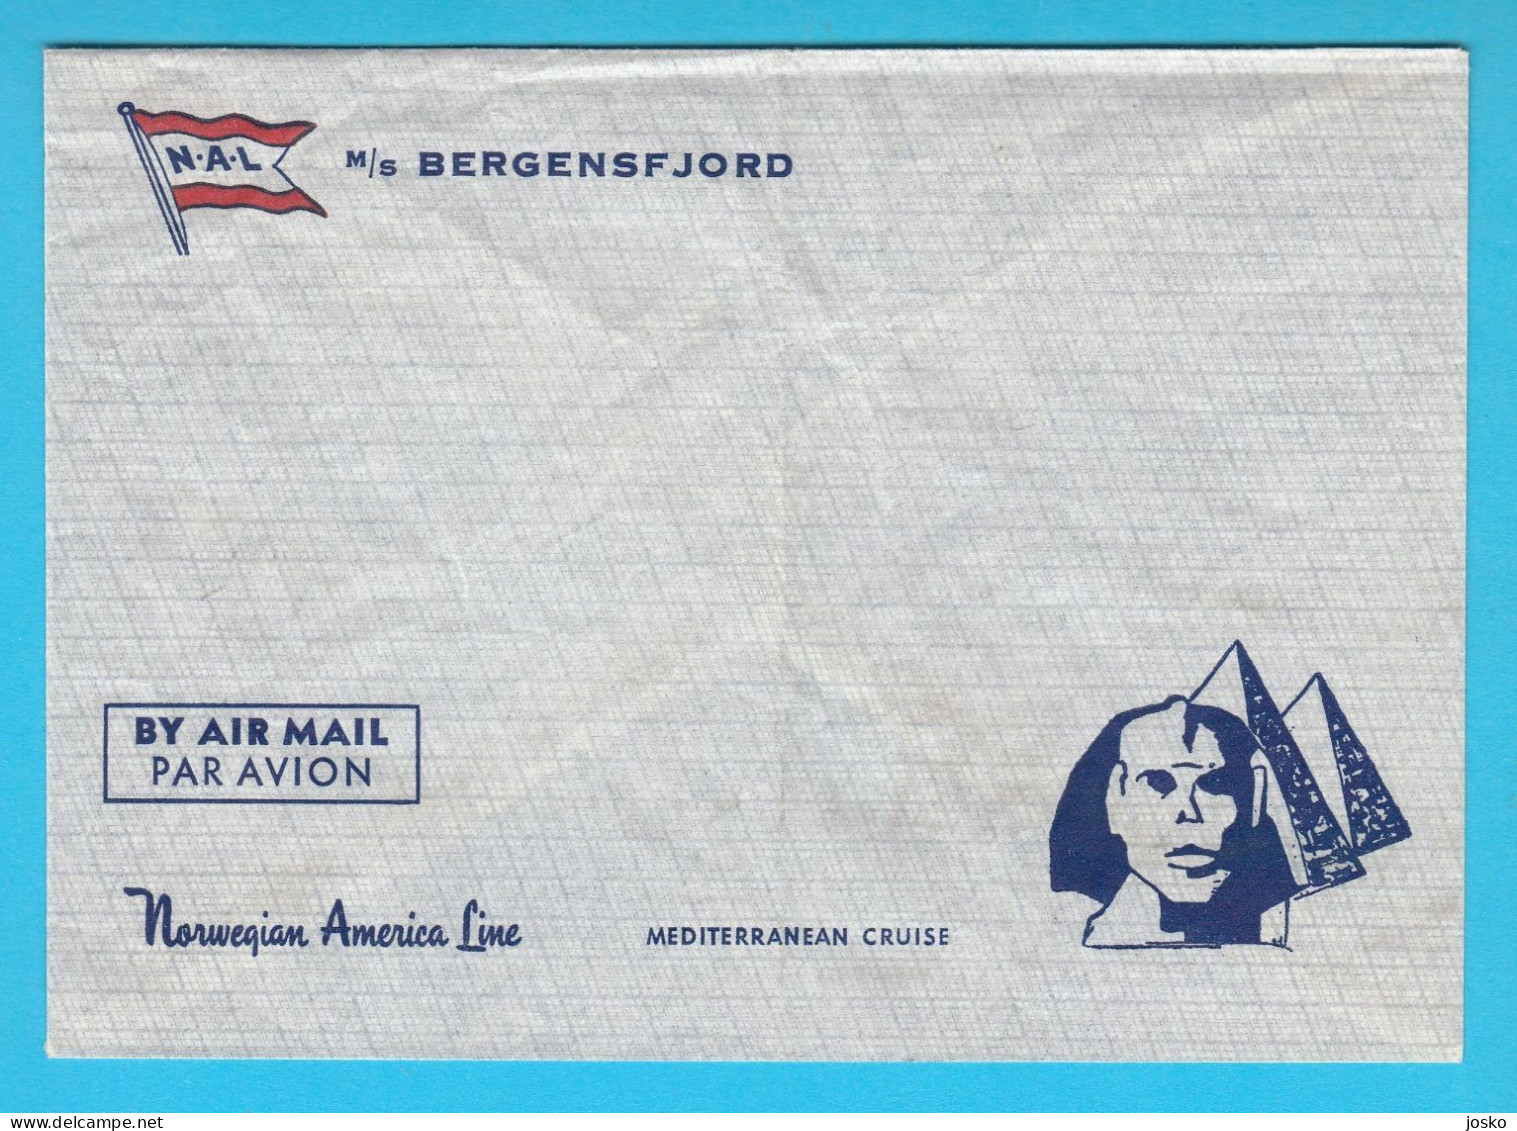 NORWEGIAN AMERICA LINE (Den Norske Amerikalinje) Ship M/S BERGENSFJORD * By Air Mail * Vintage Official Cover * Norway - Covers & Documents